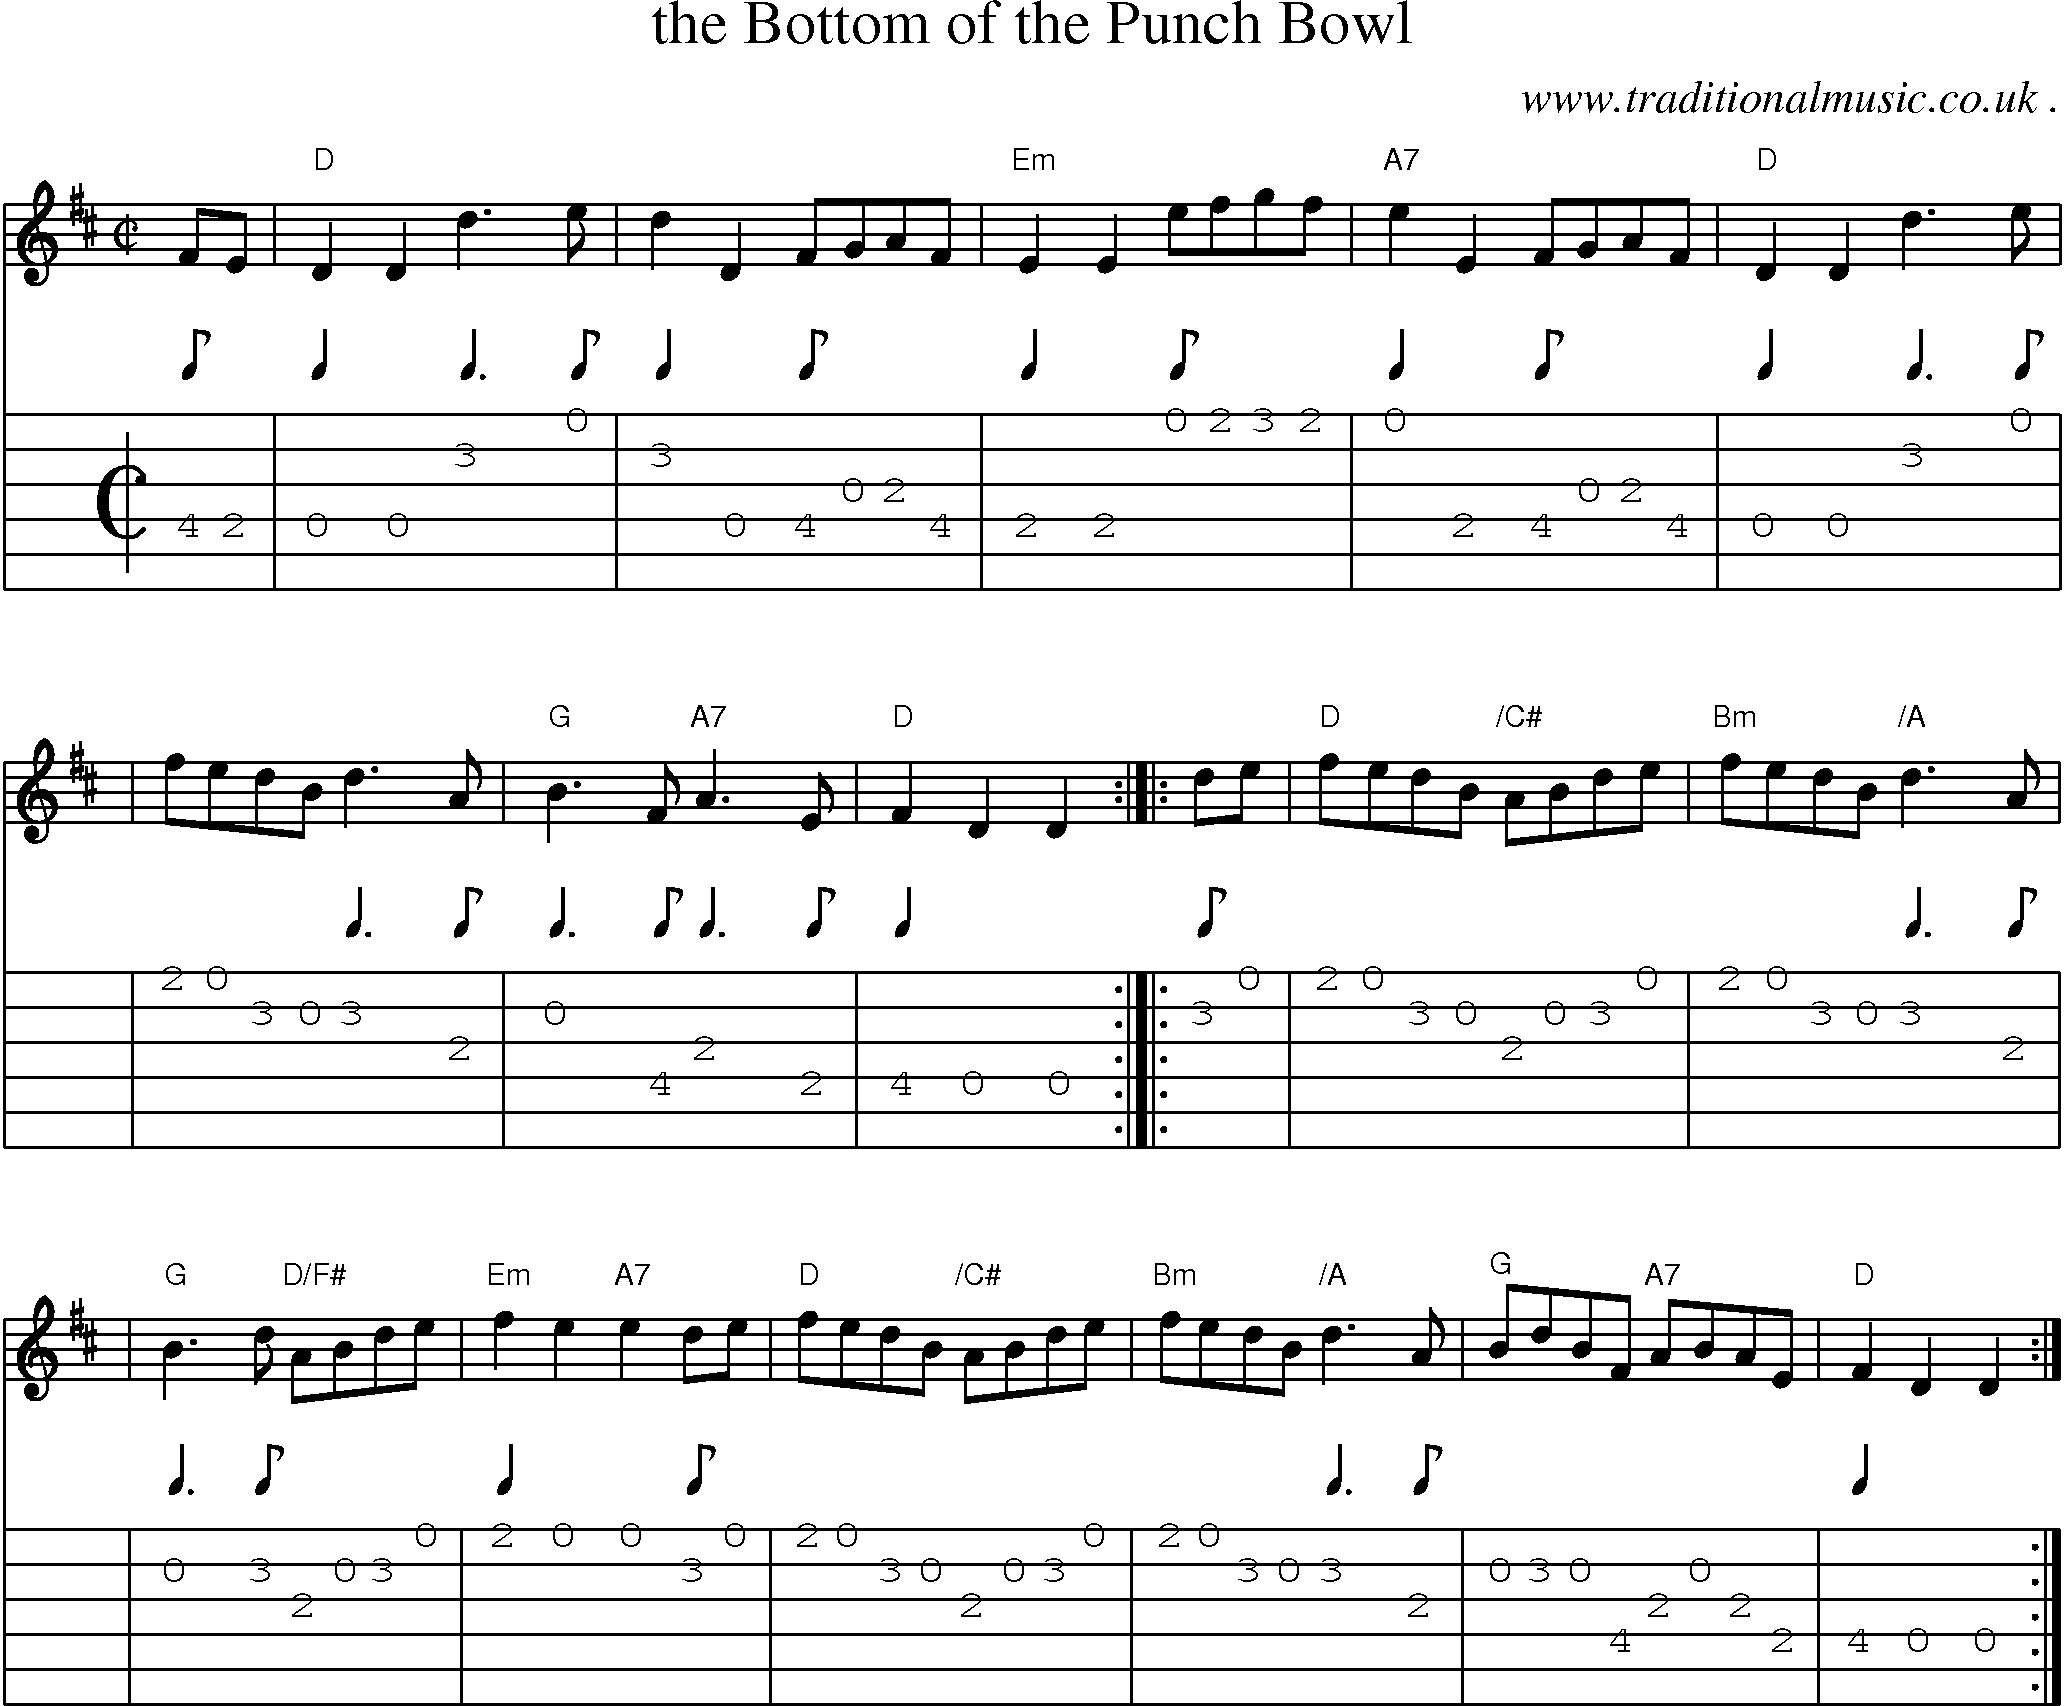 Sheet-music  score, Chords and Guitar Tabs for The Bottom Of The Punch Bowl